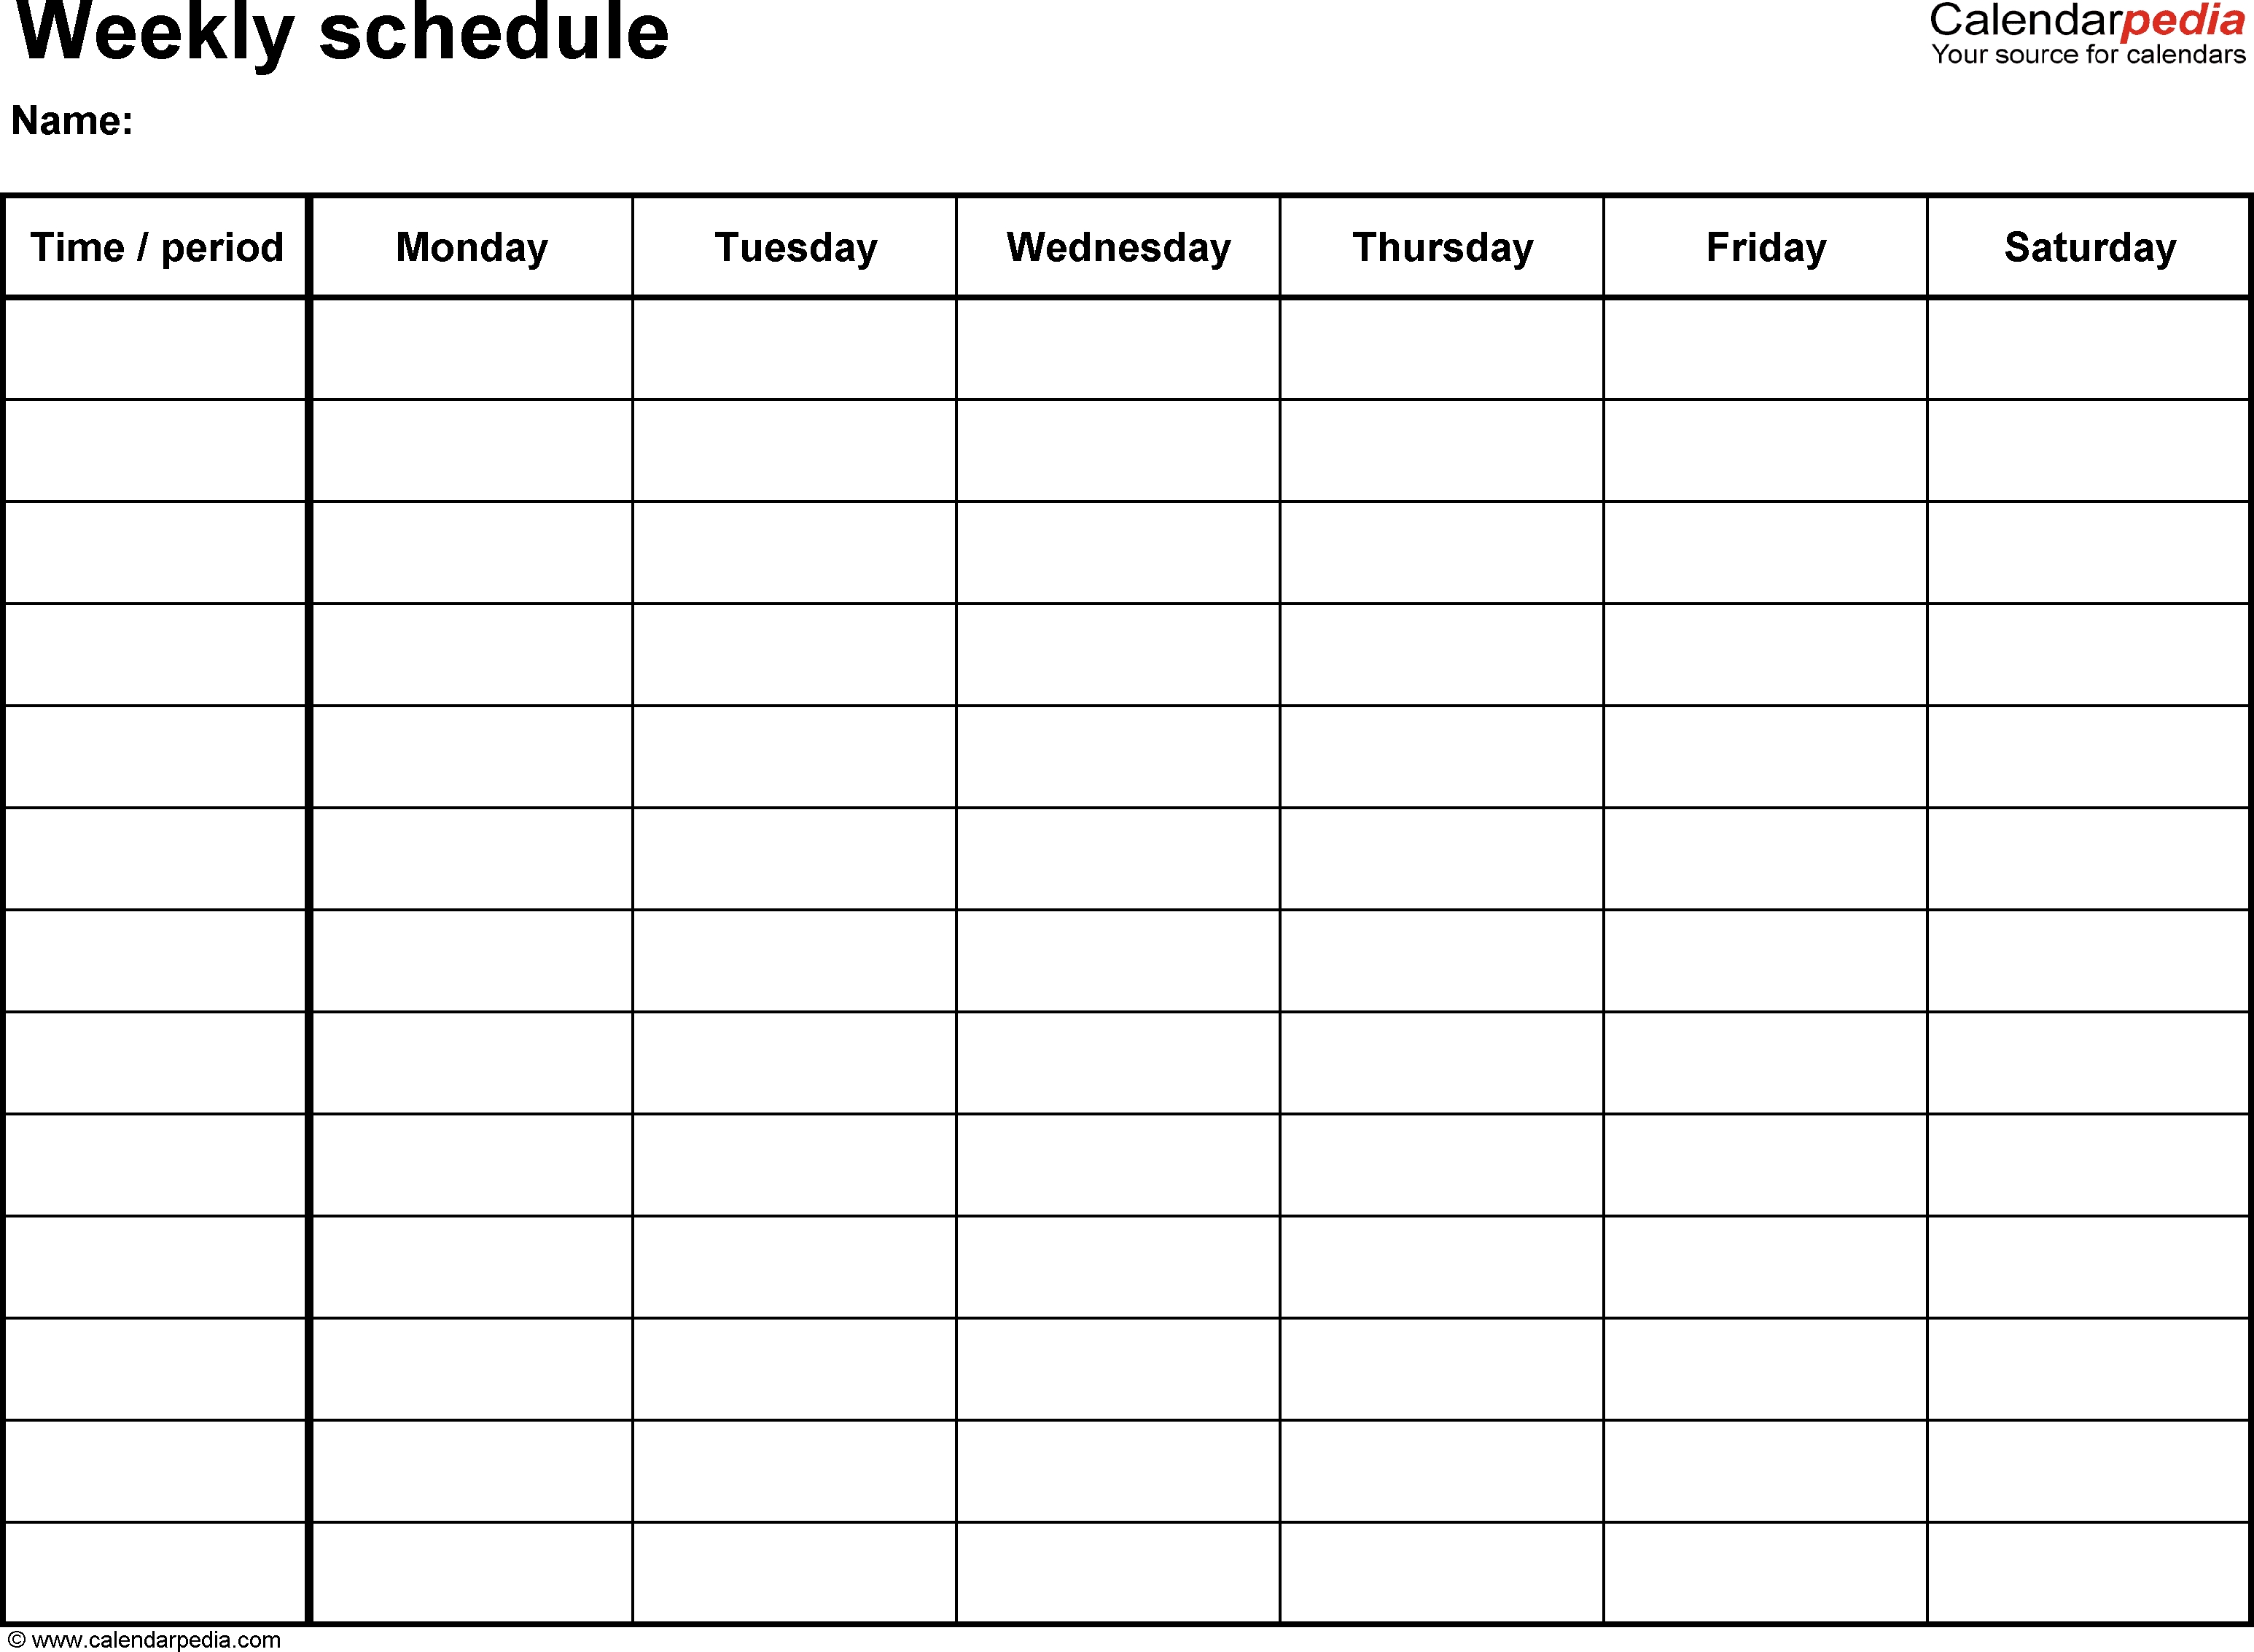 Free Weekly Schedule Templates For Word - 18 Templates for Free Fill In Calendar Templates Month